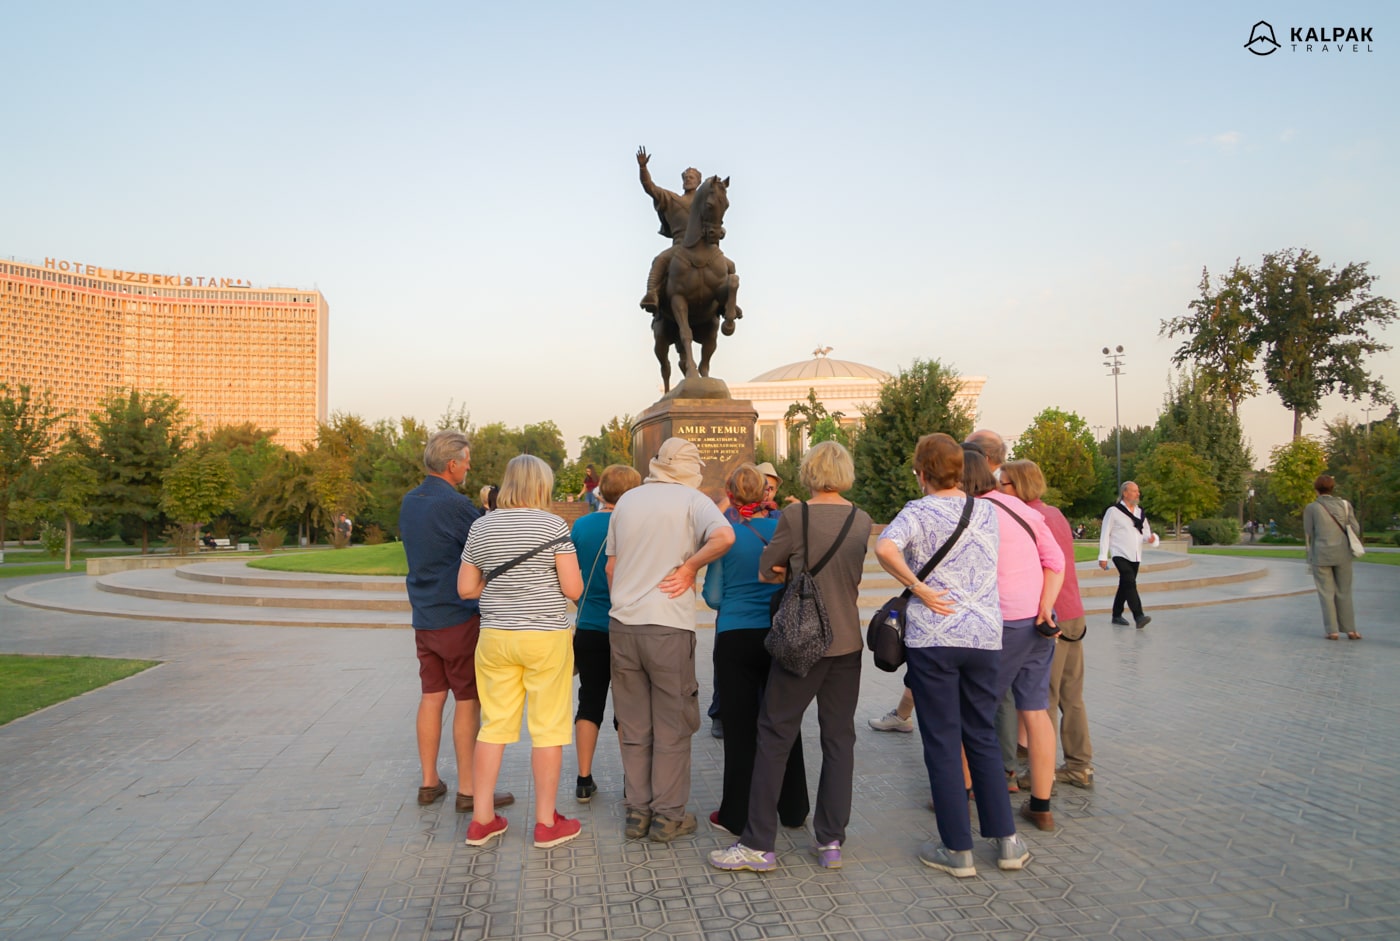 Group of tourists in Central Asia